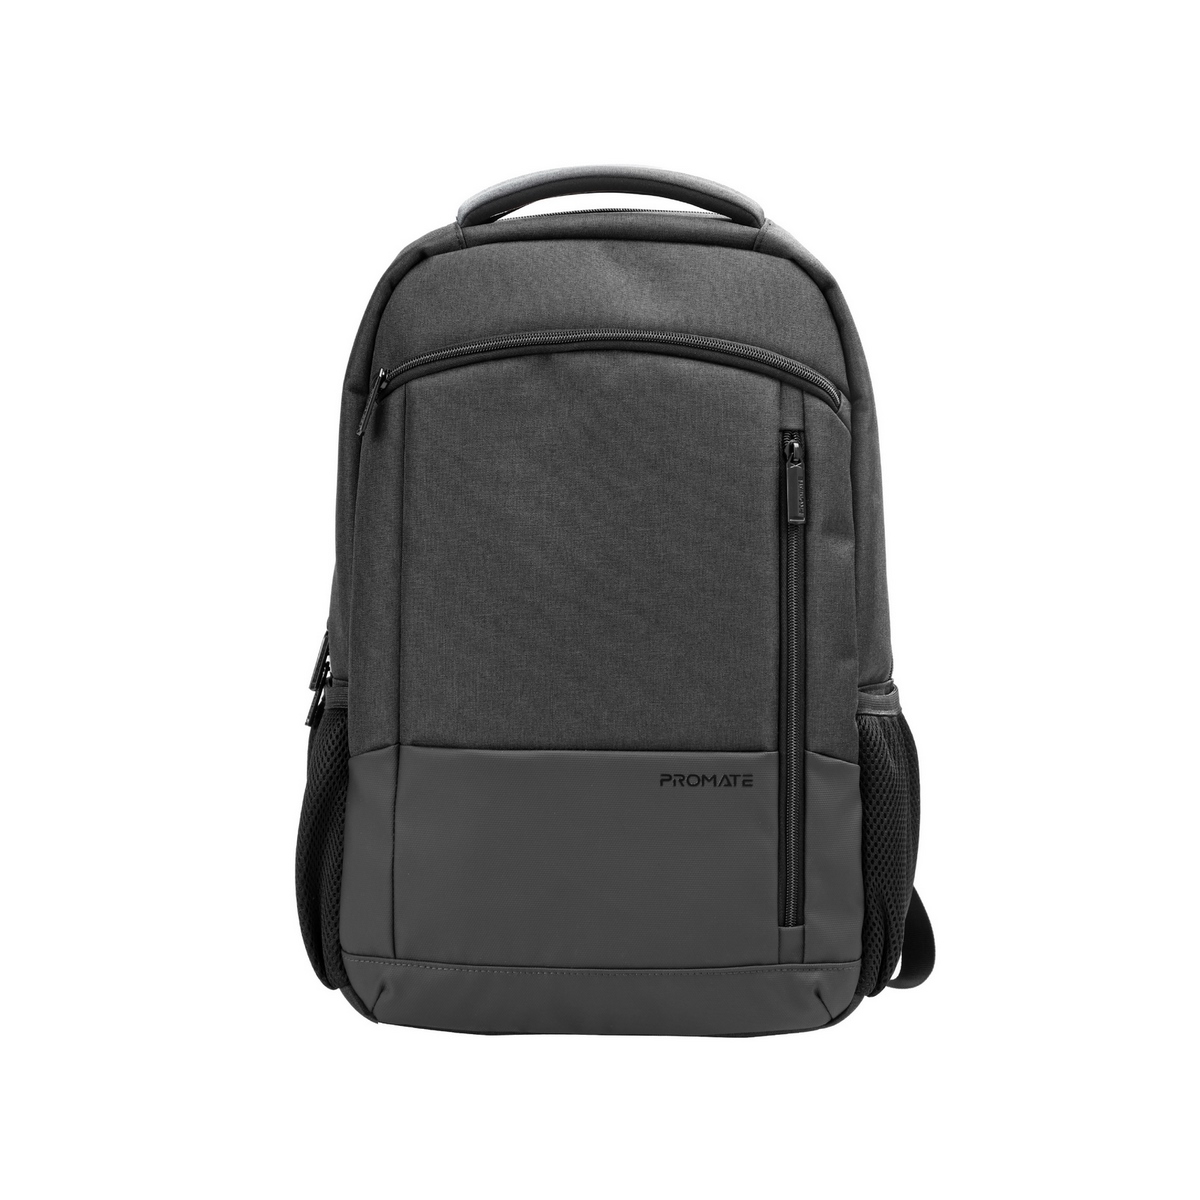 Promate Laptop Backpack, SleekComfort Lightweight 15.6” Laptop Backpack with Secure Zippers, Water-Resistance, Multiple Compartments and Tablet pocket for MacBook Air, iPad Air, Dell XPS 15, Satchel-BP